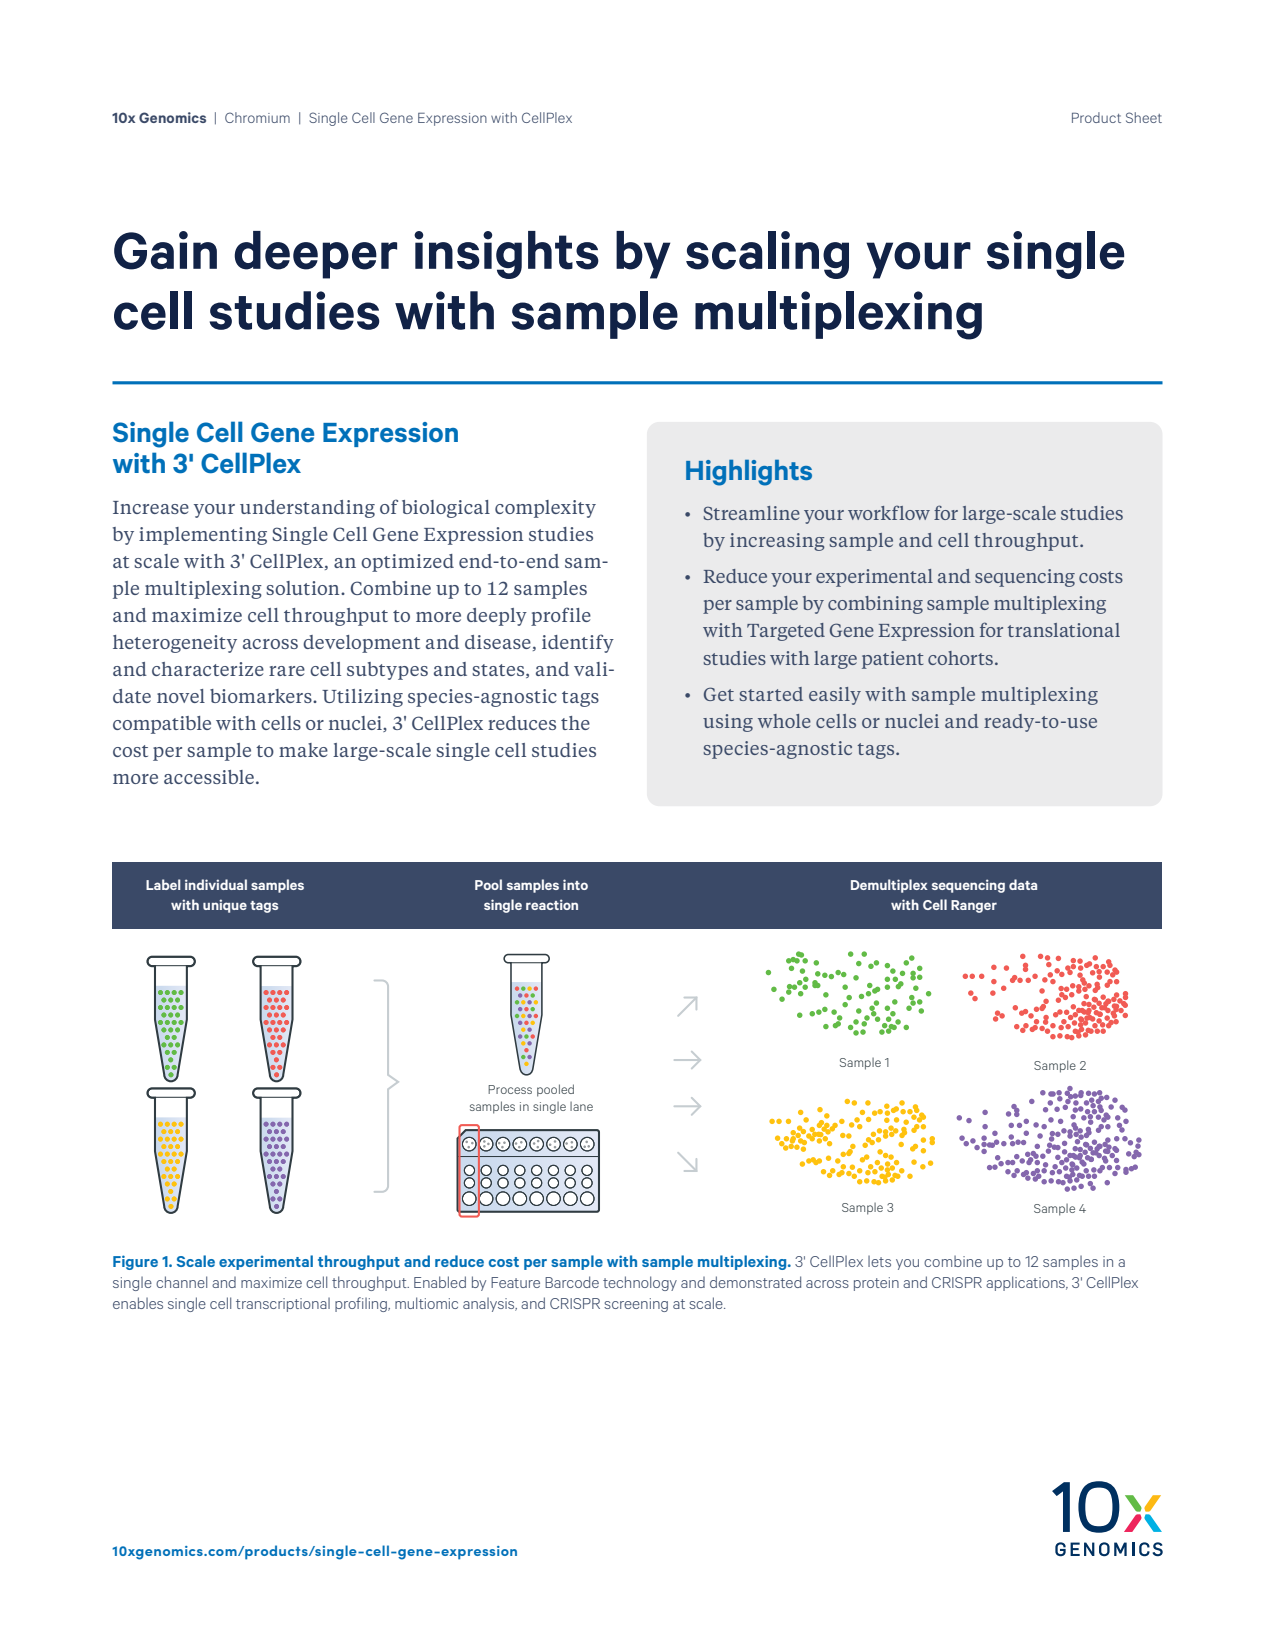 Gain deeper insights by scaling your single cell studies with sample multiplexing